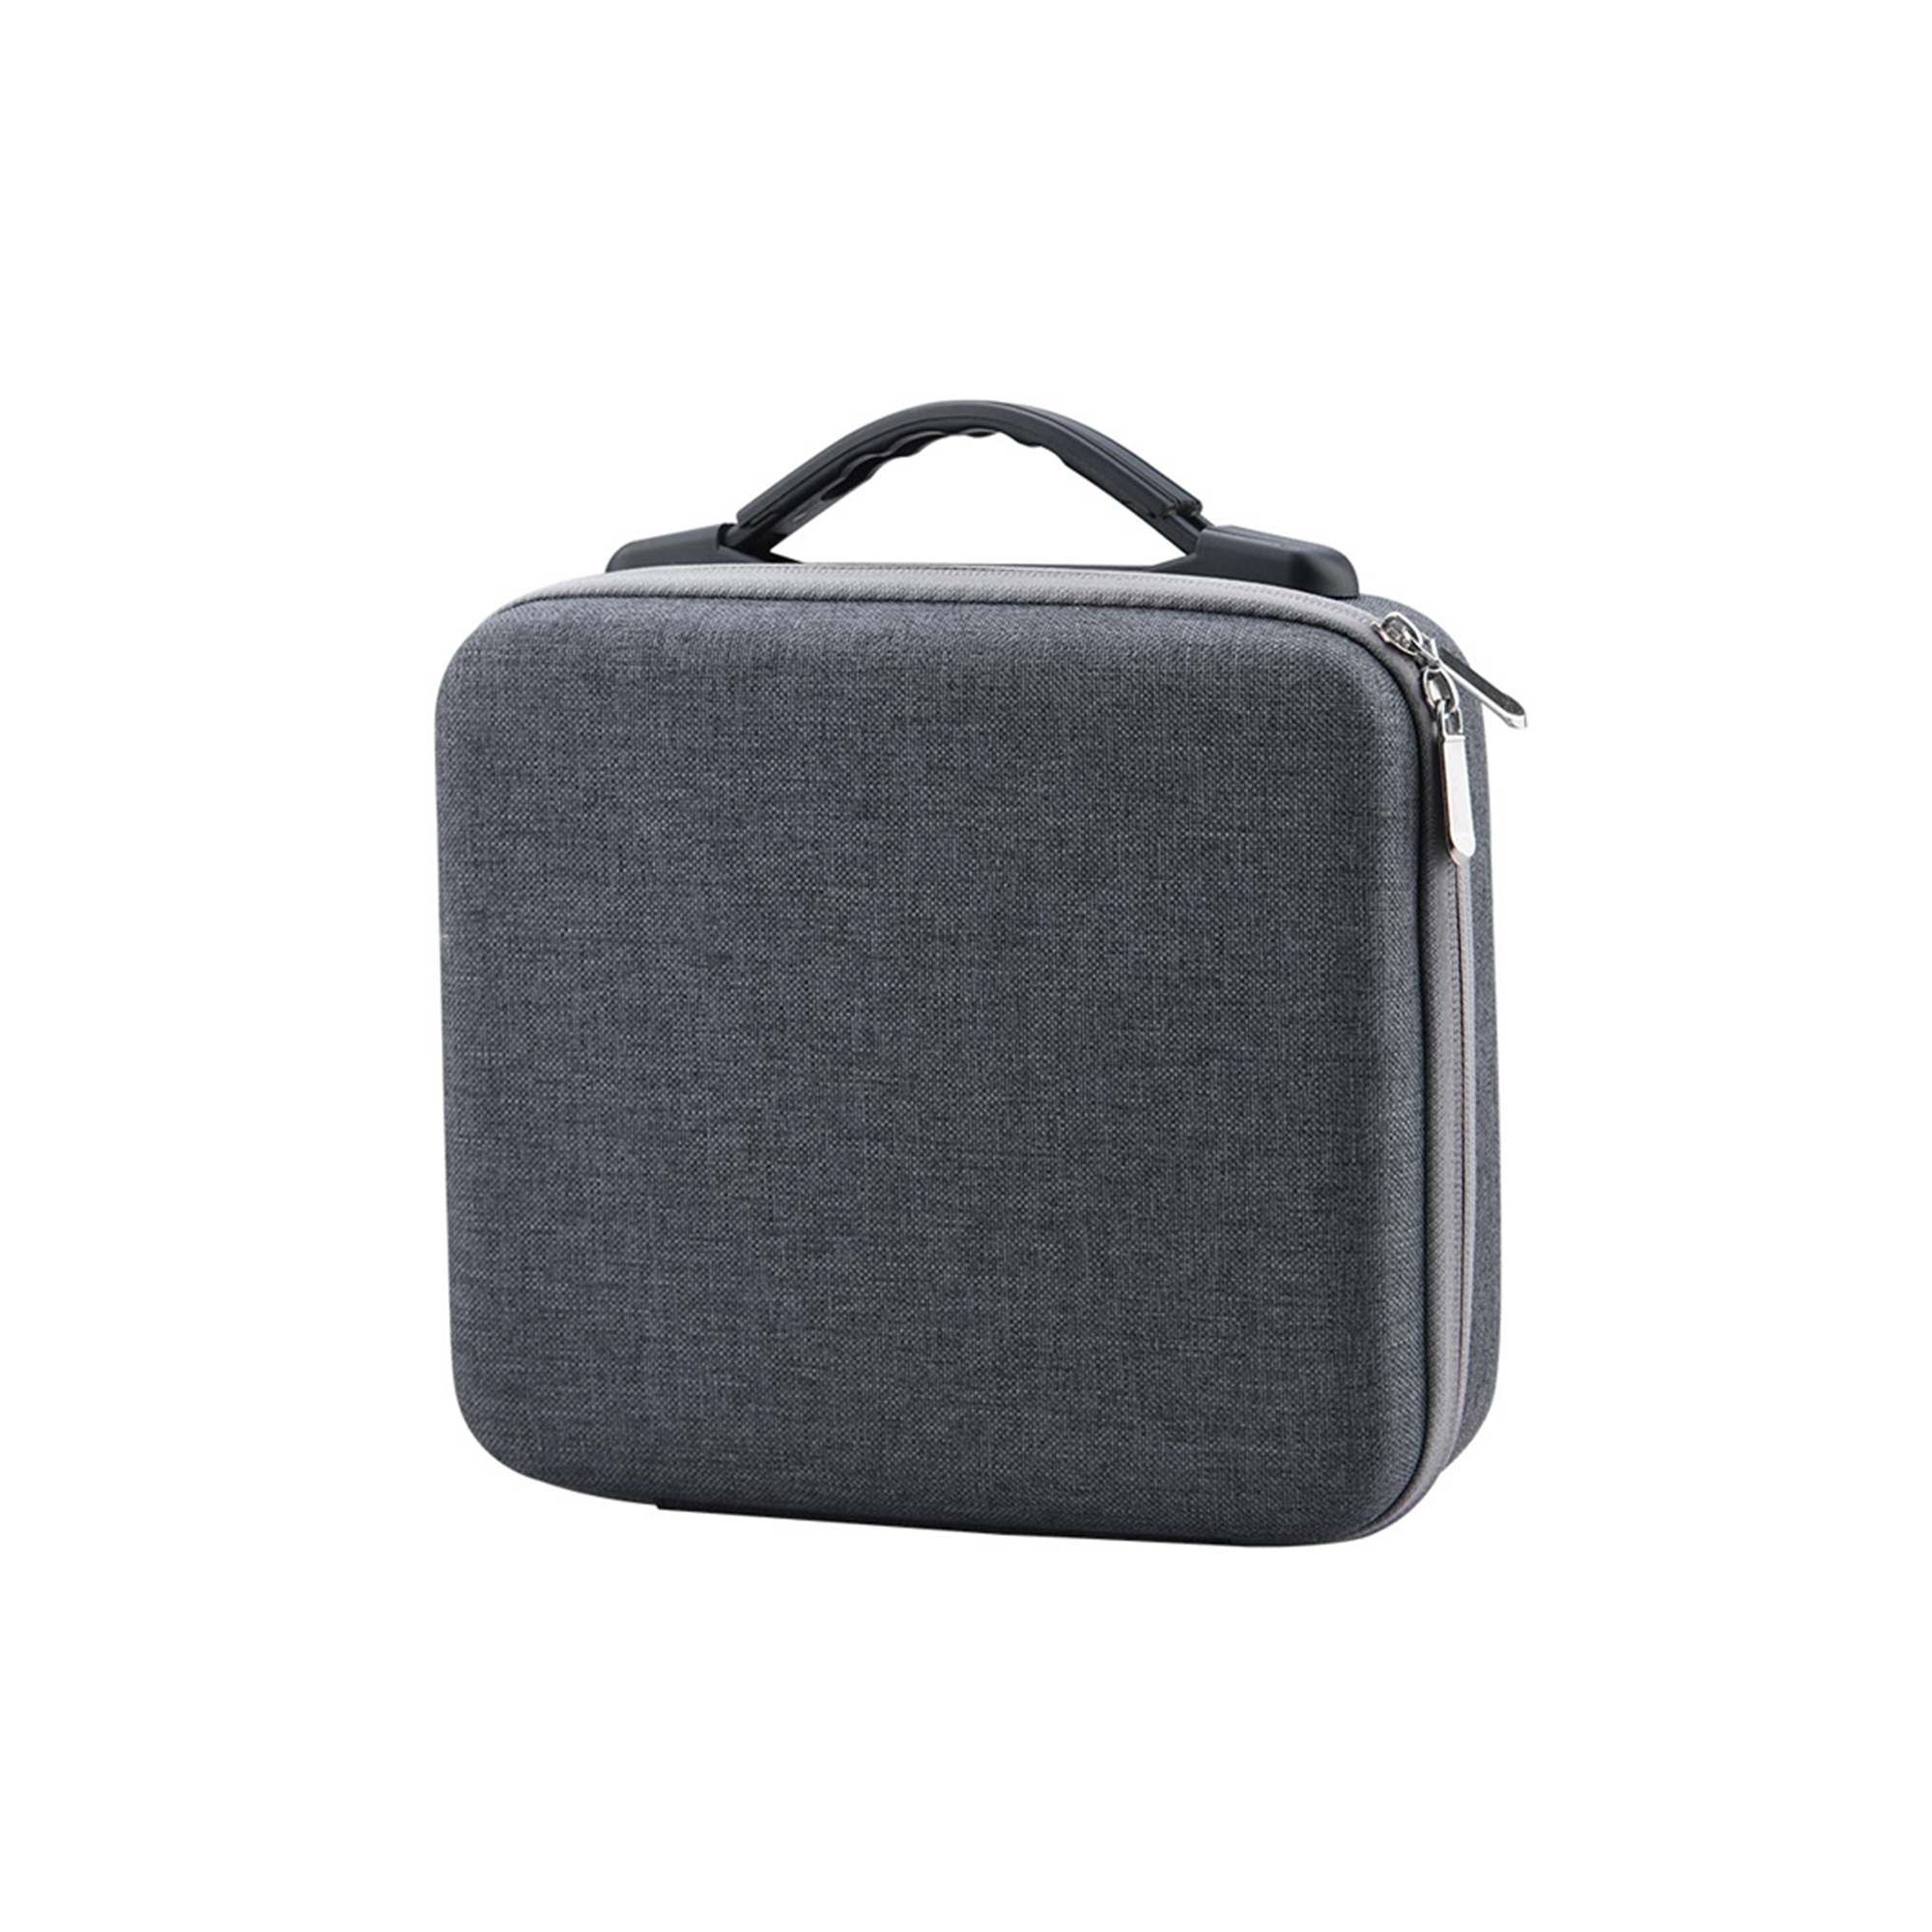 Osmo Action 4 / Action 3 PU Hard Carrying Bag